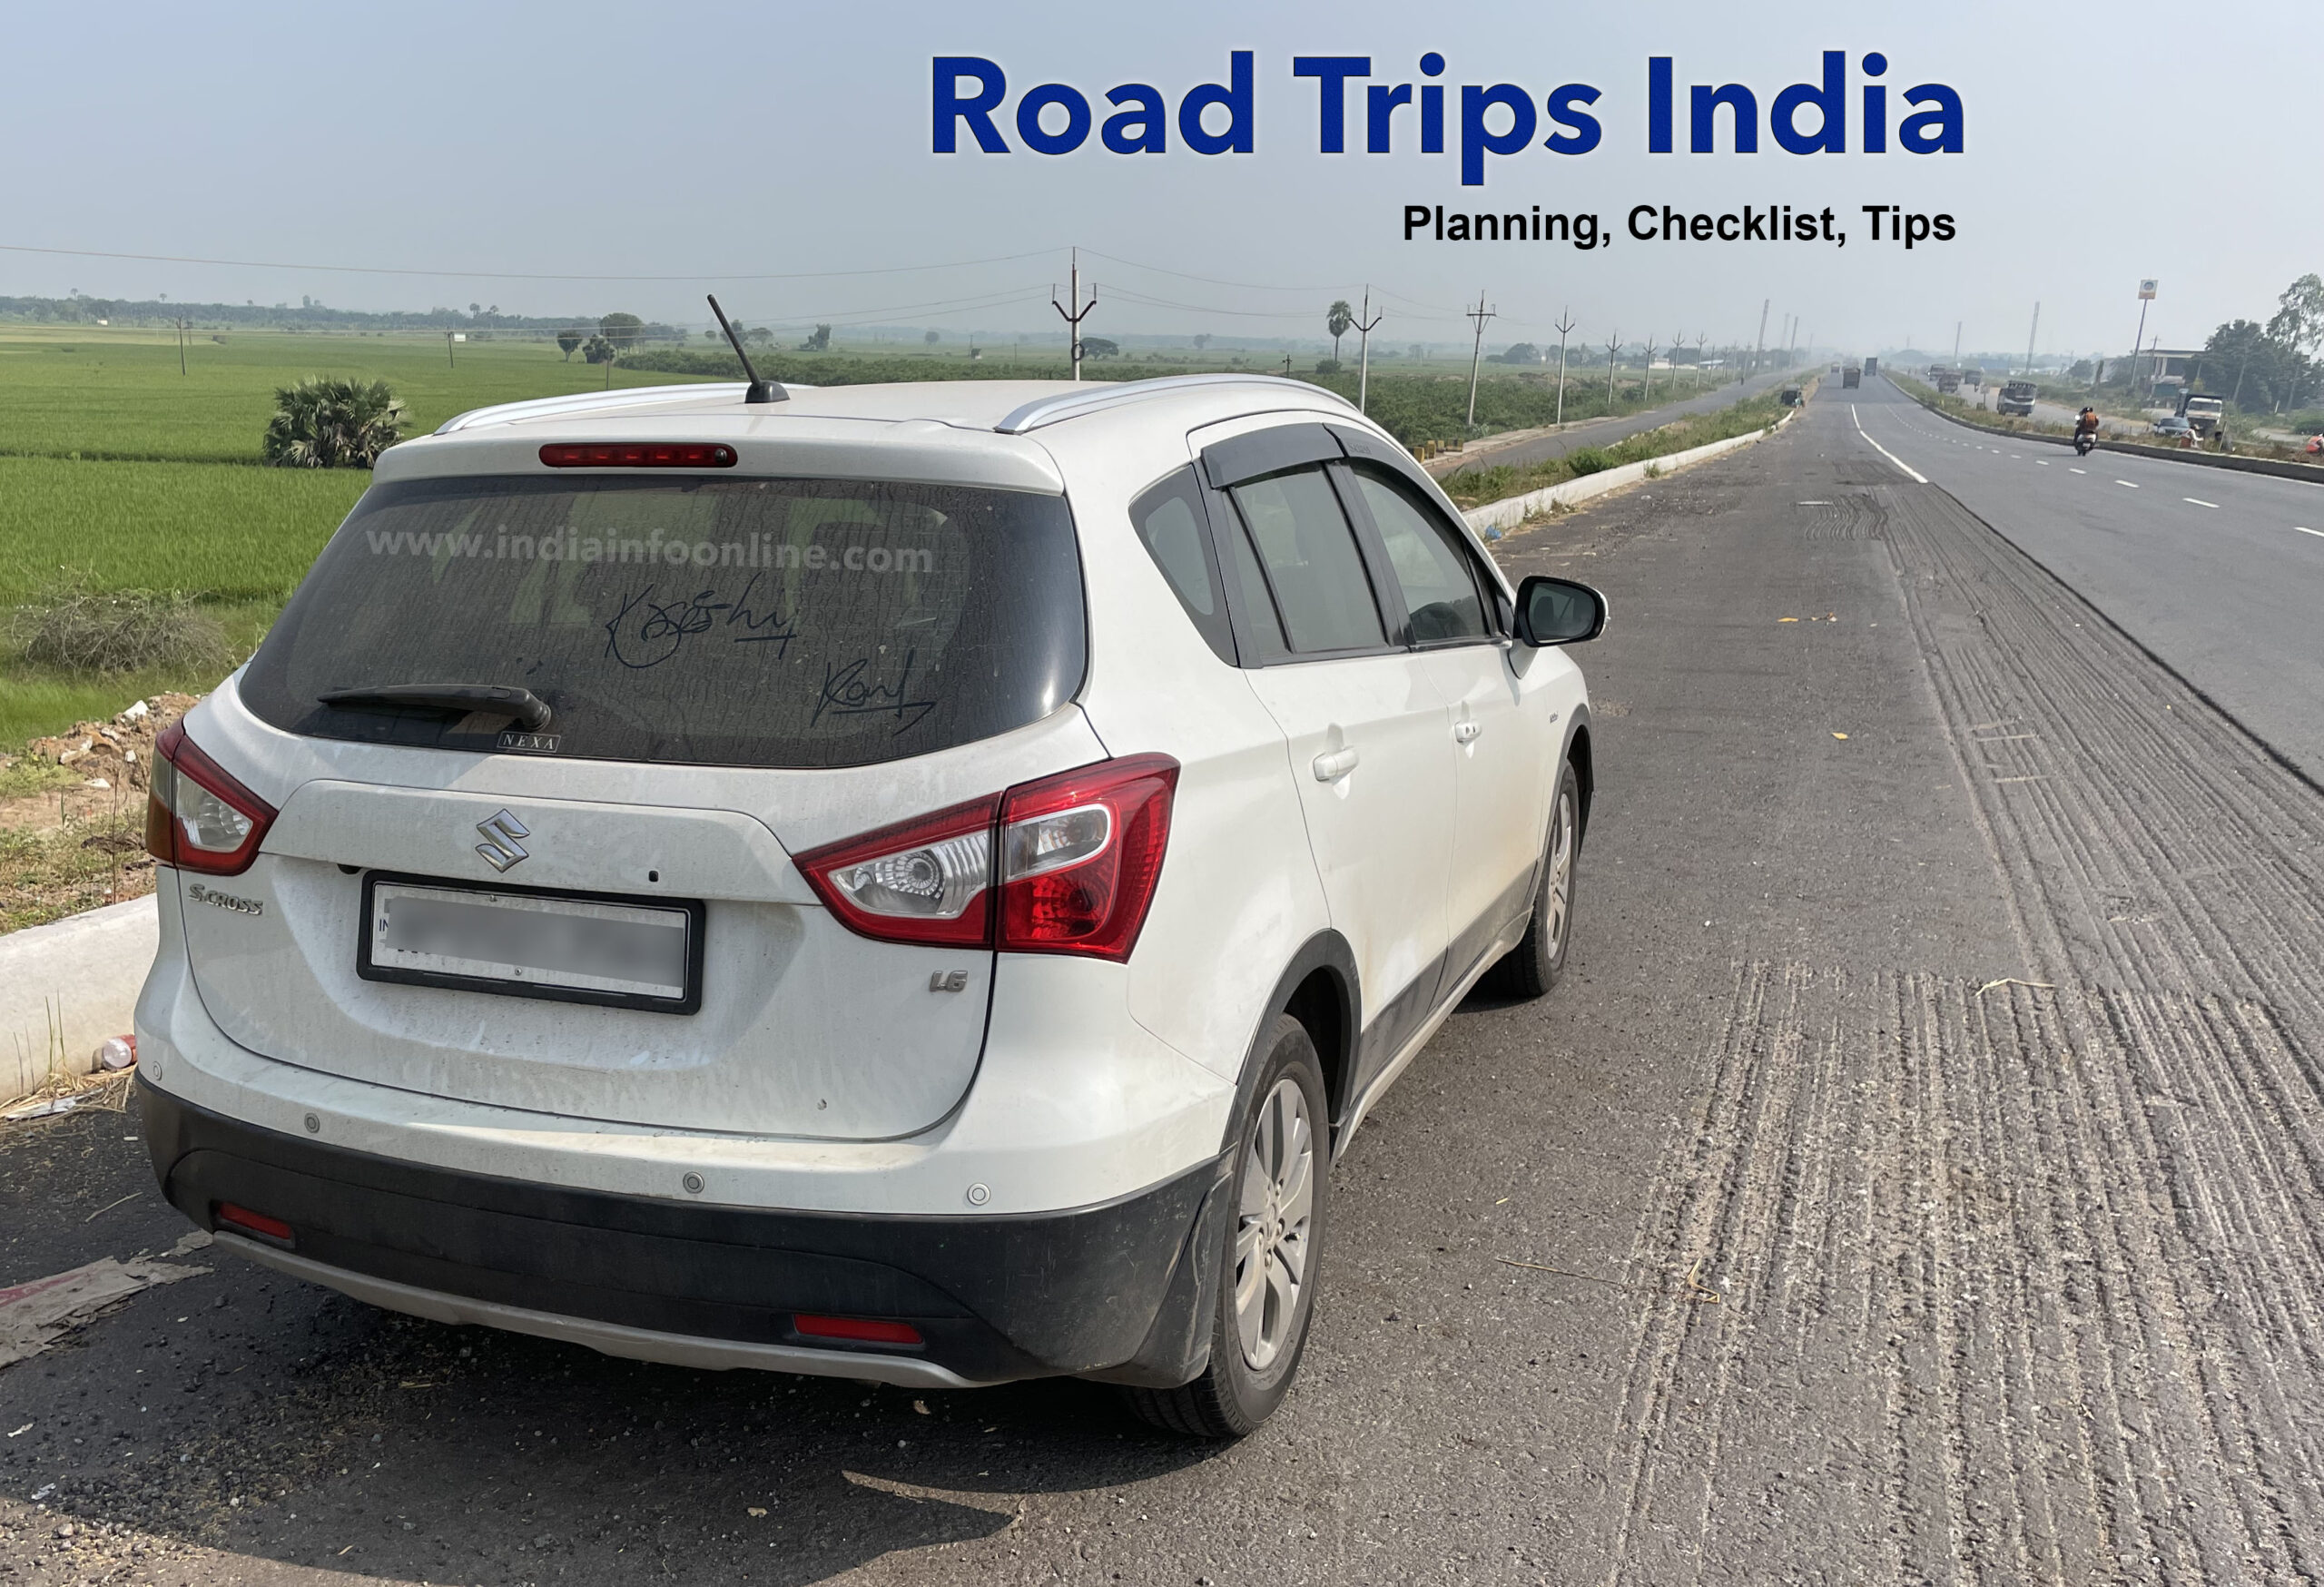 Road Trips in India – How to Plan?, Checklist, Tips